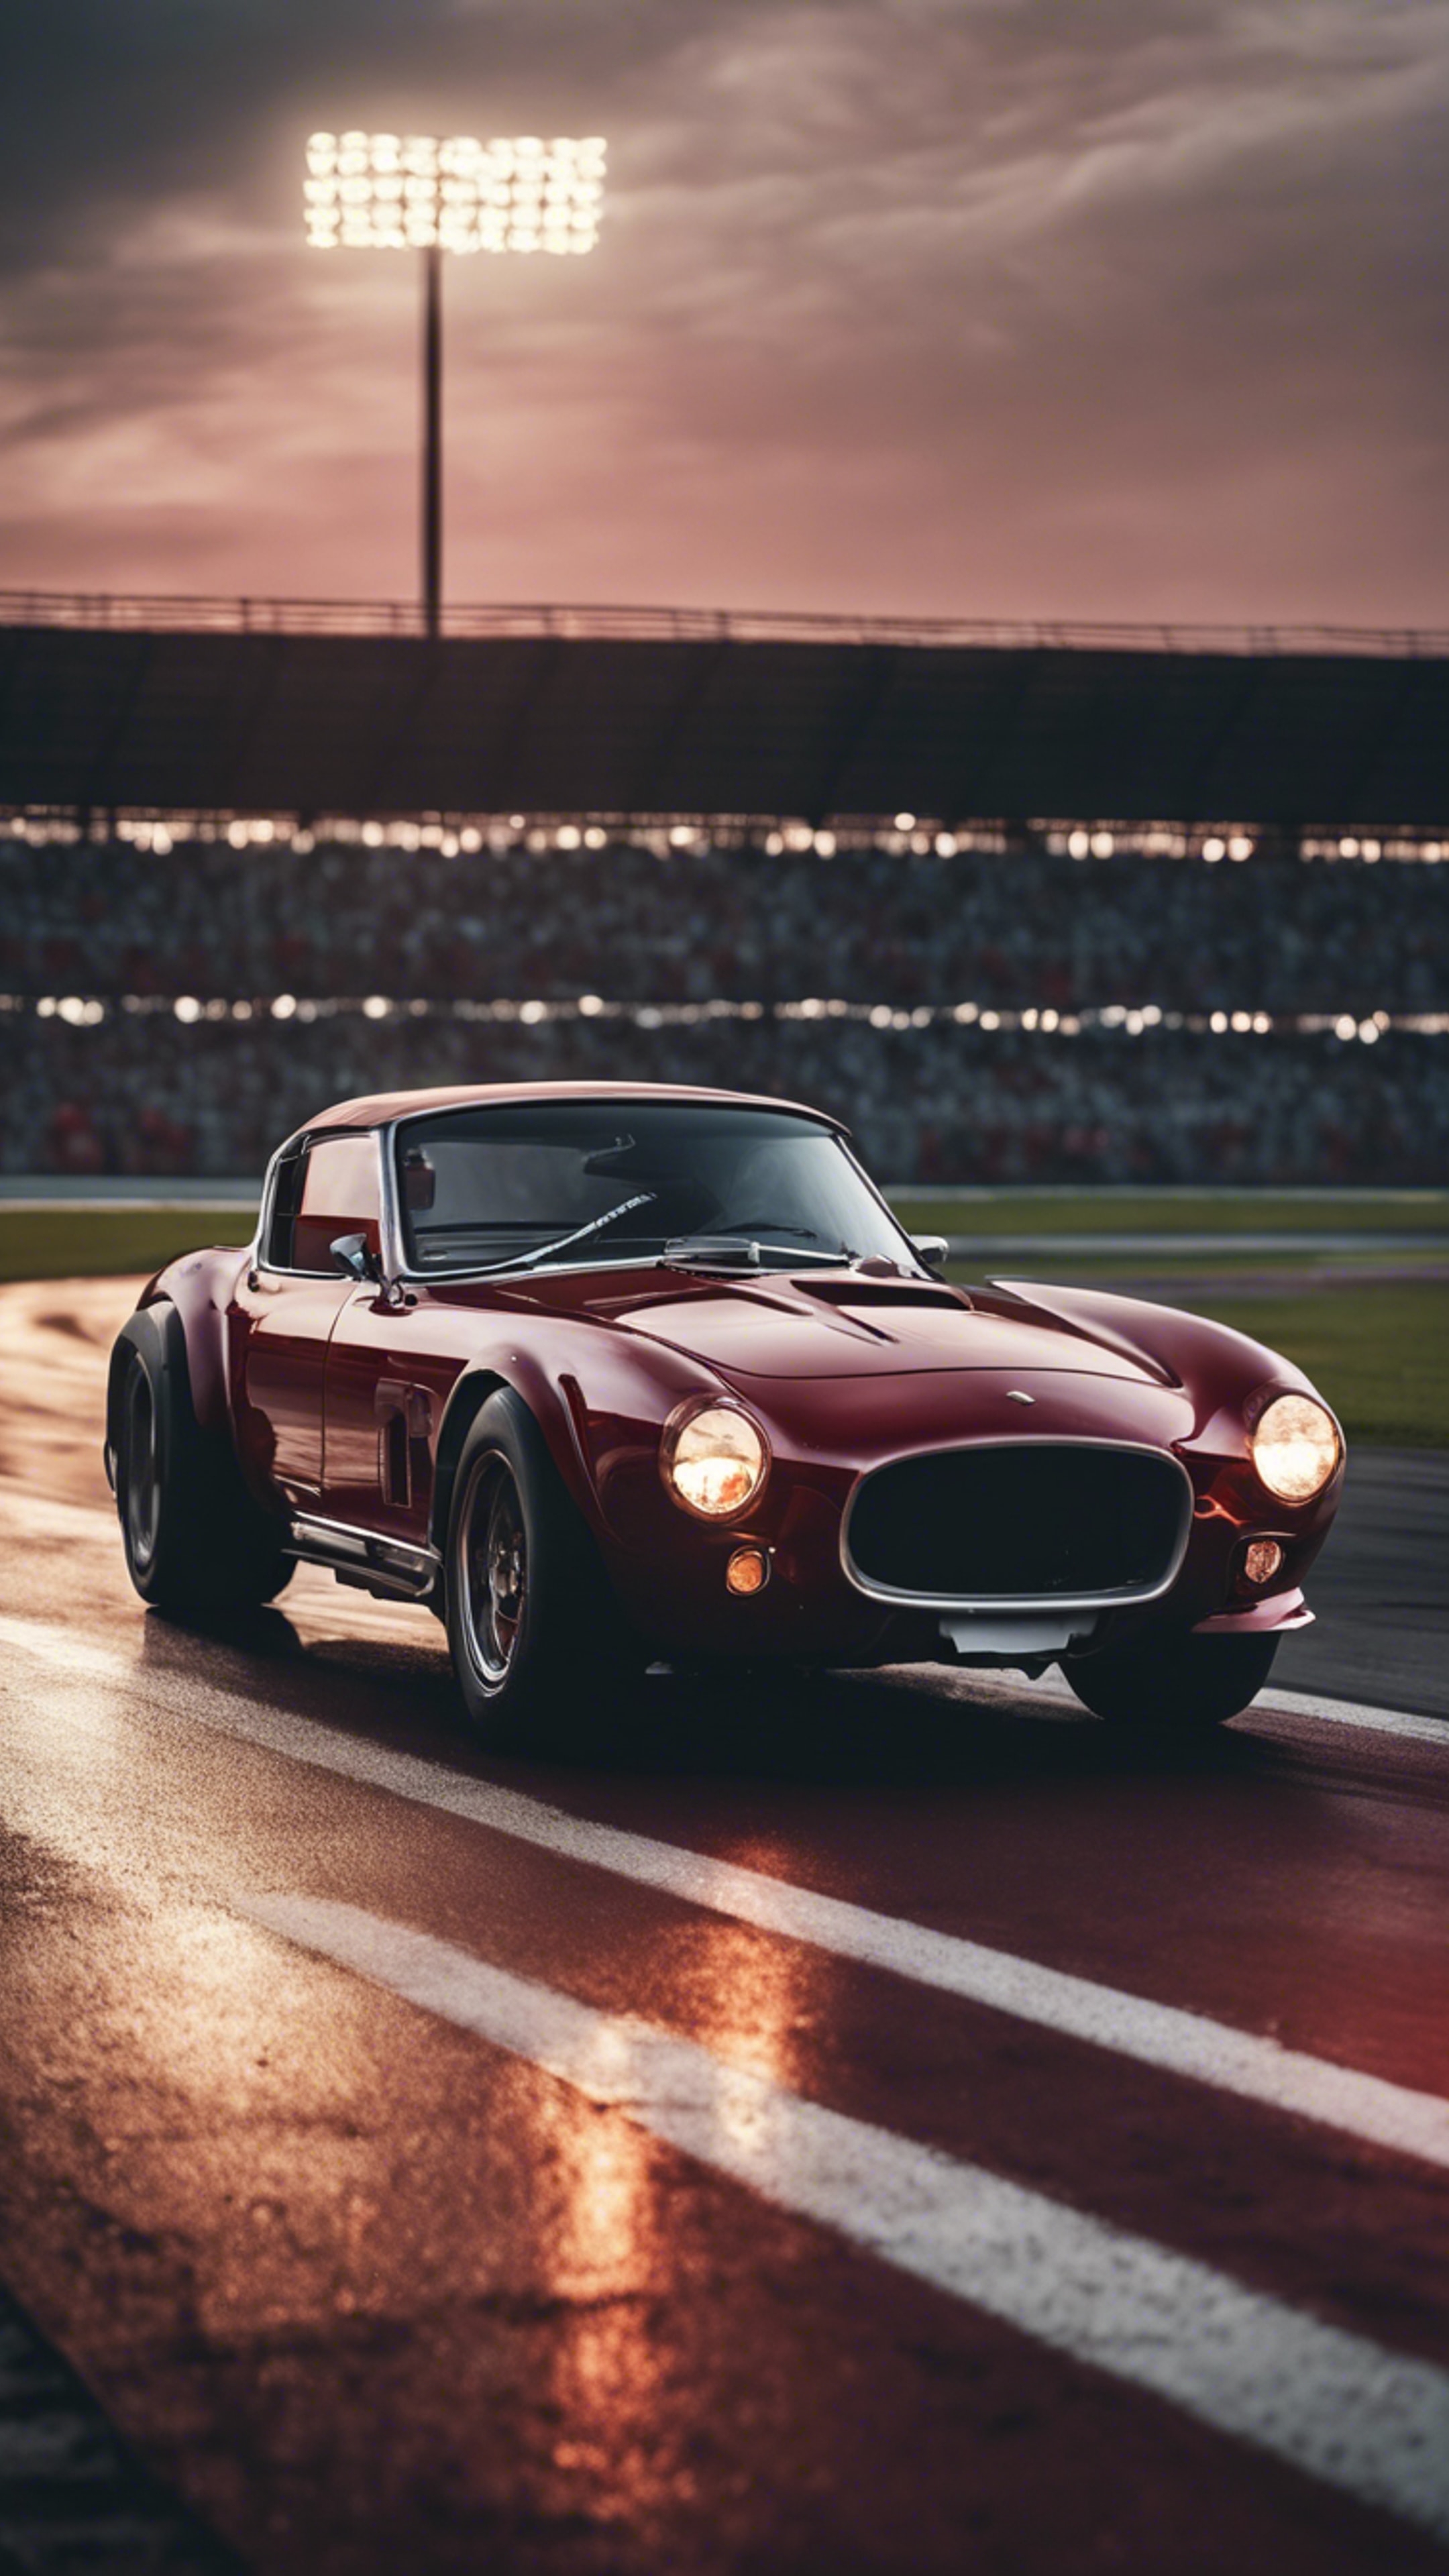 A richly toned dark red sports car racing on a track under the evening sky. Tapet[f7c86e5103c94fca80ae]